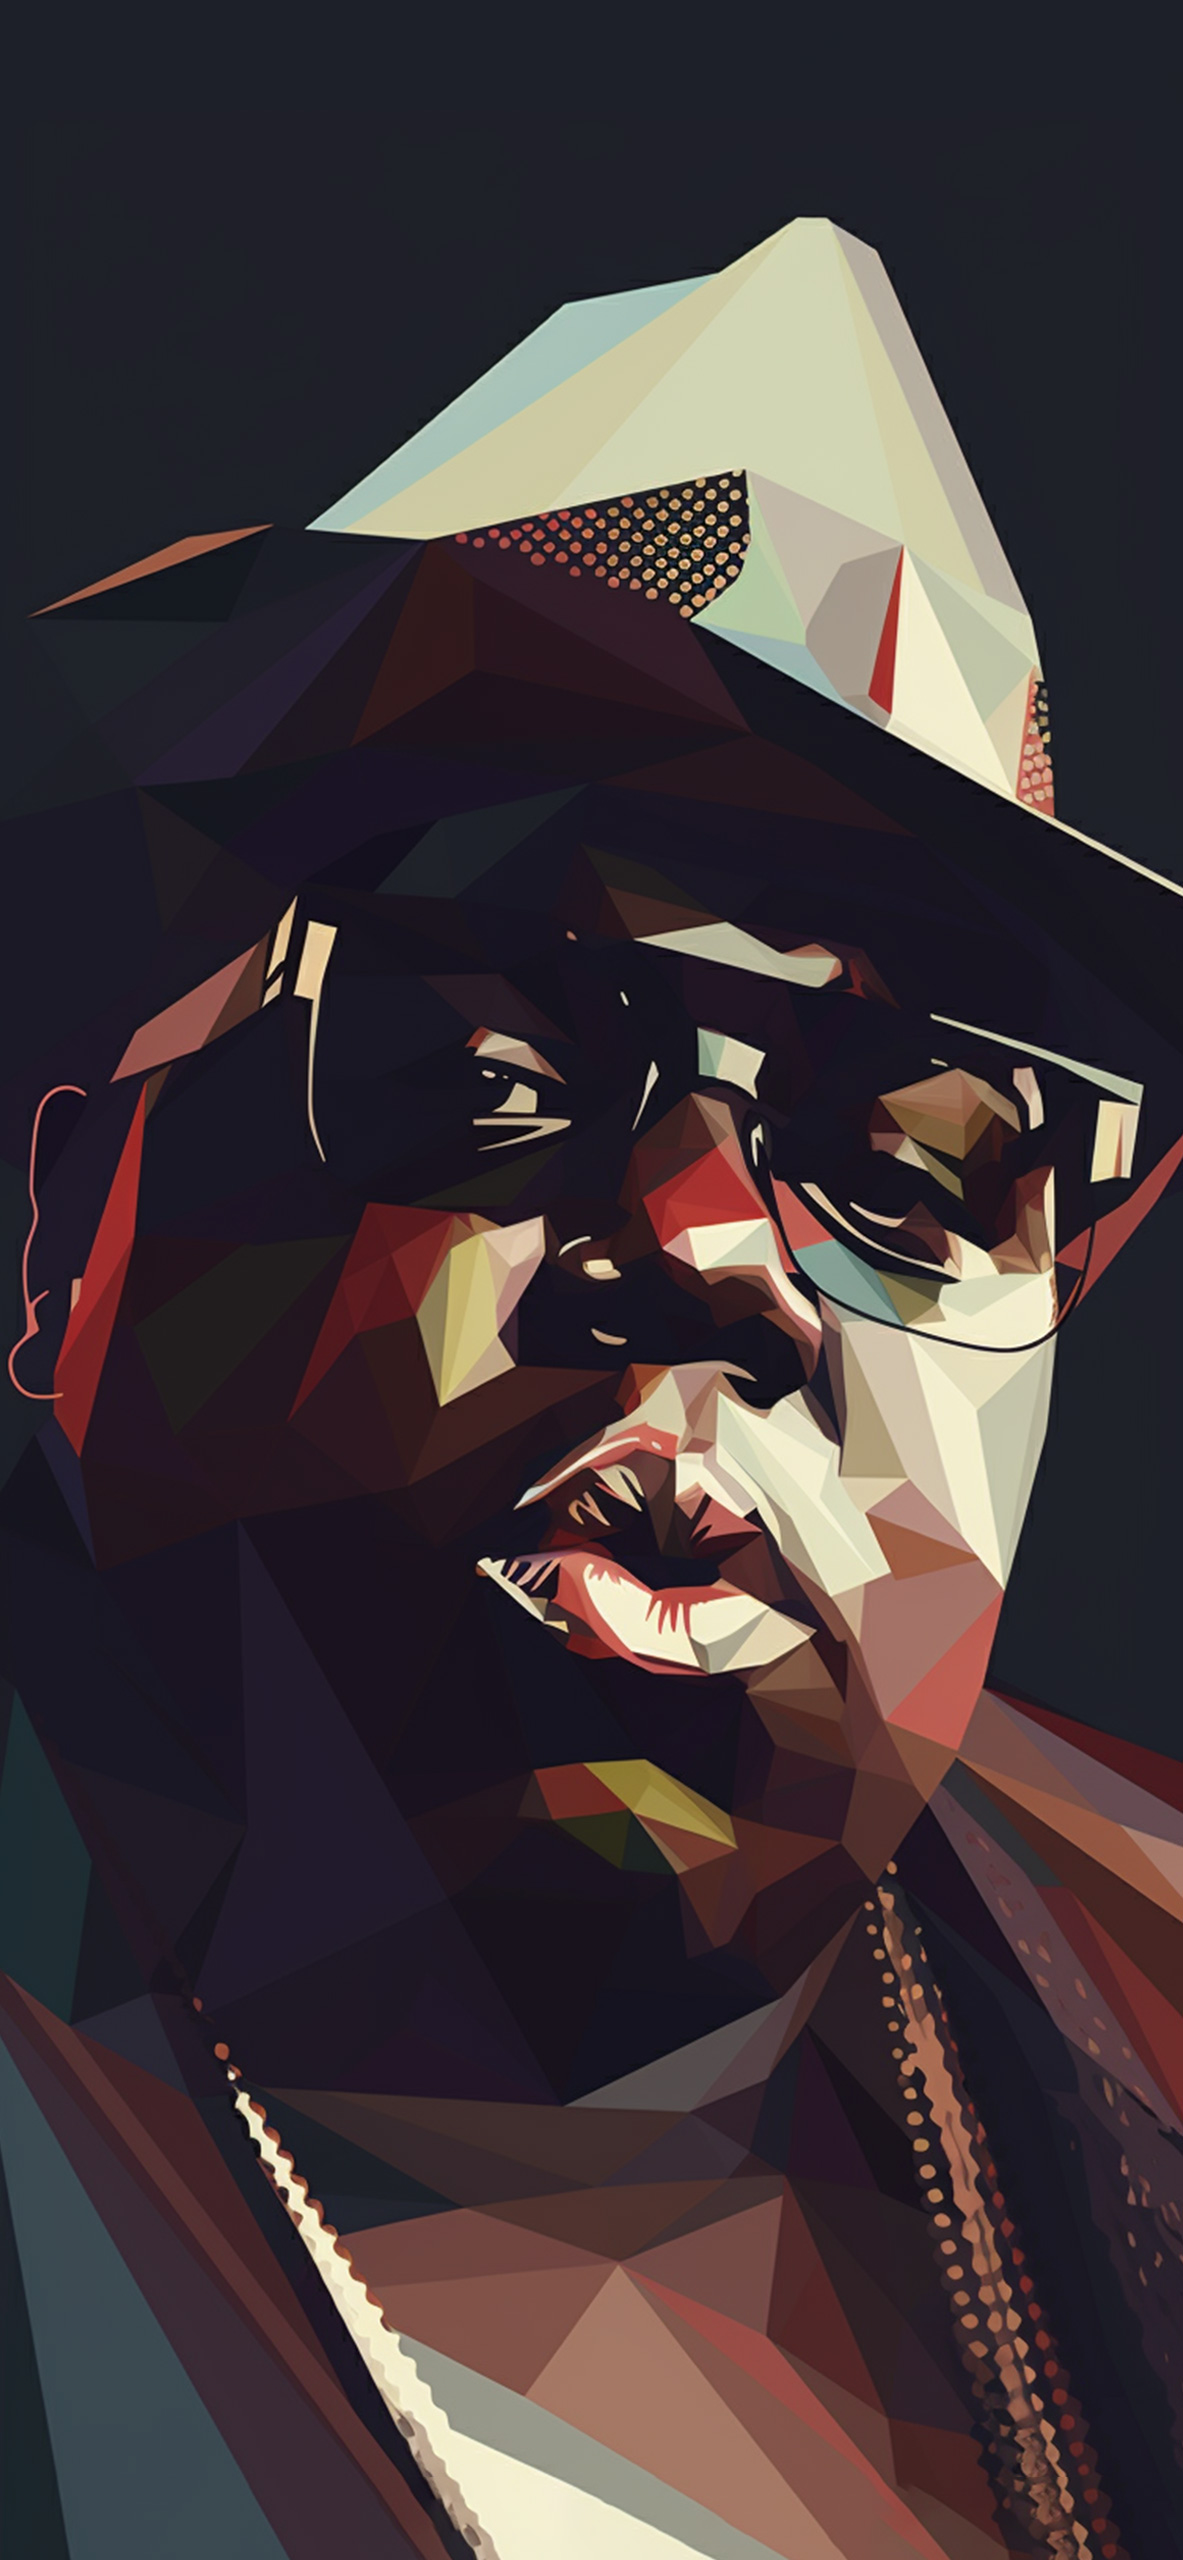 The Notorious B.I.G. Art Wallpaper Wallpaper for iPhone